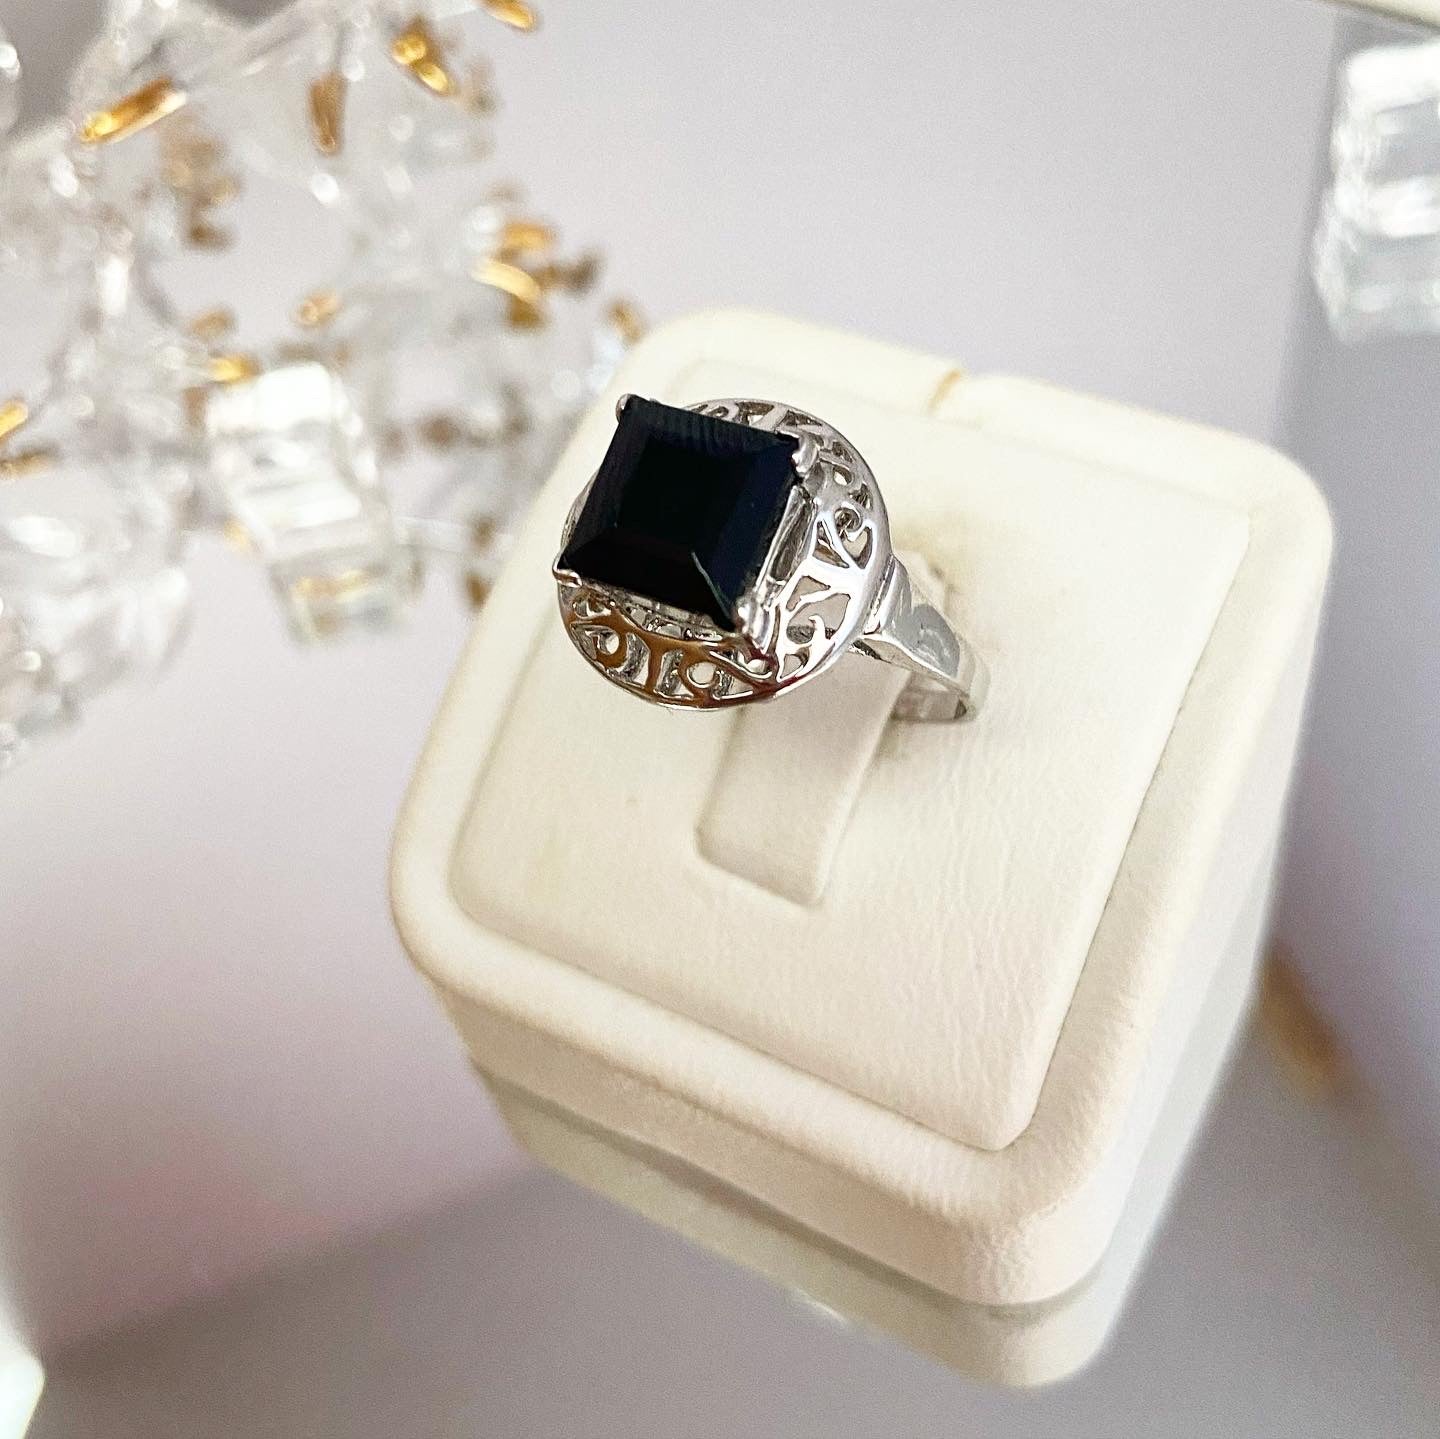 Ring with onyx